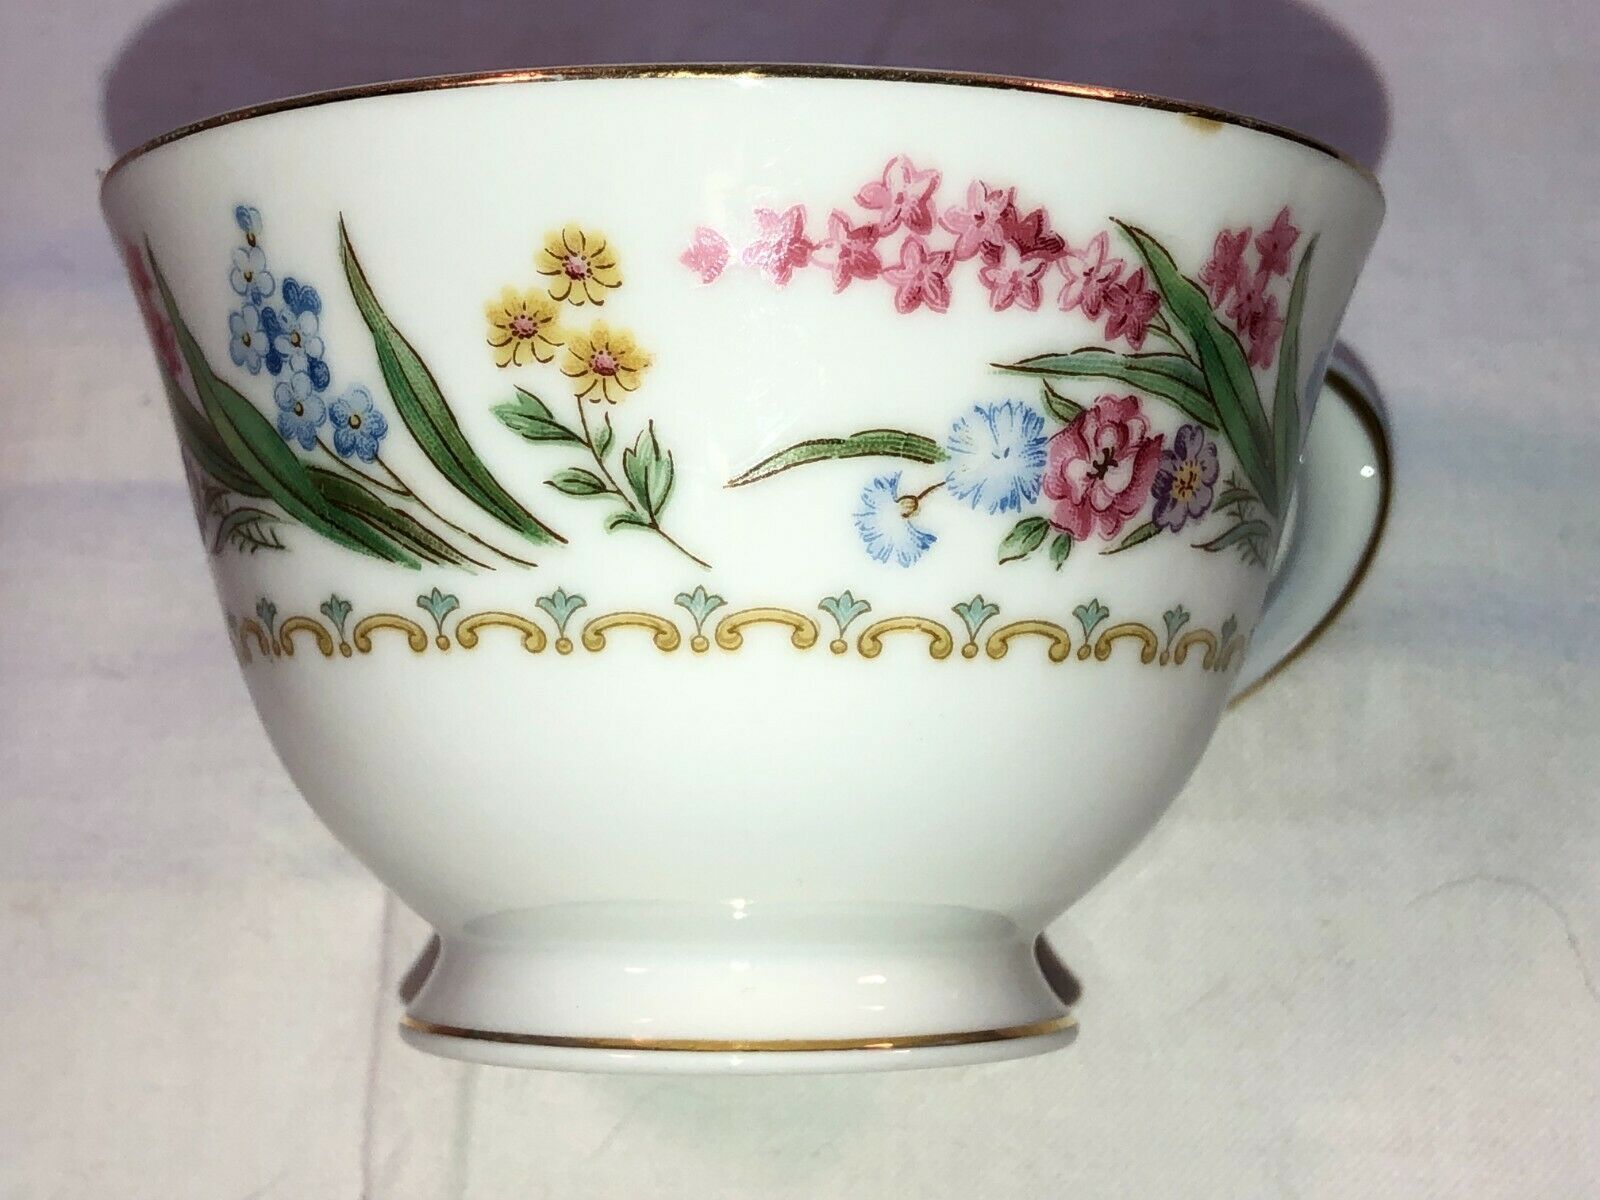 9 Vintage Noritake Spring Blossoms Coffee Cup 2 3/8" Wide Mint 1950's - $12.99